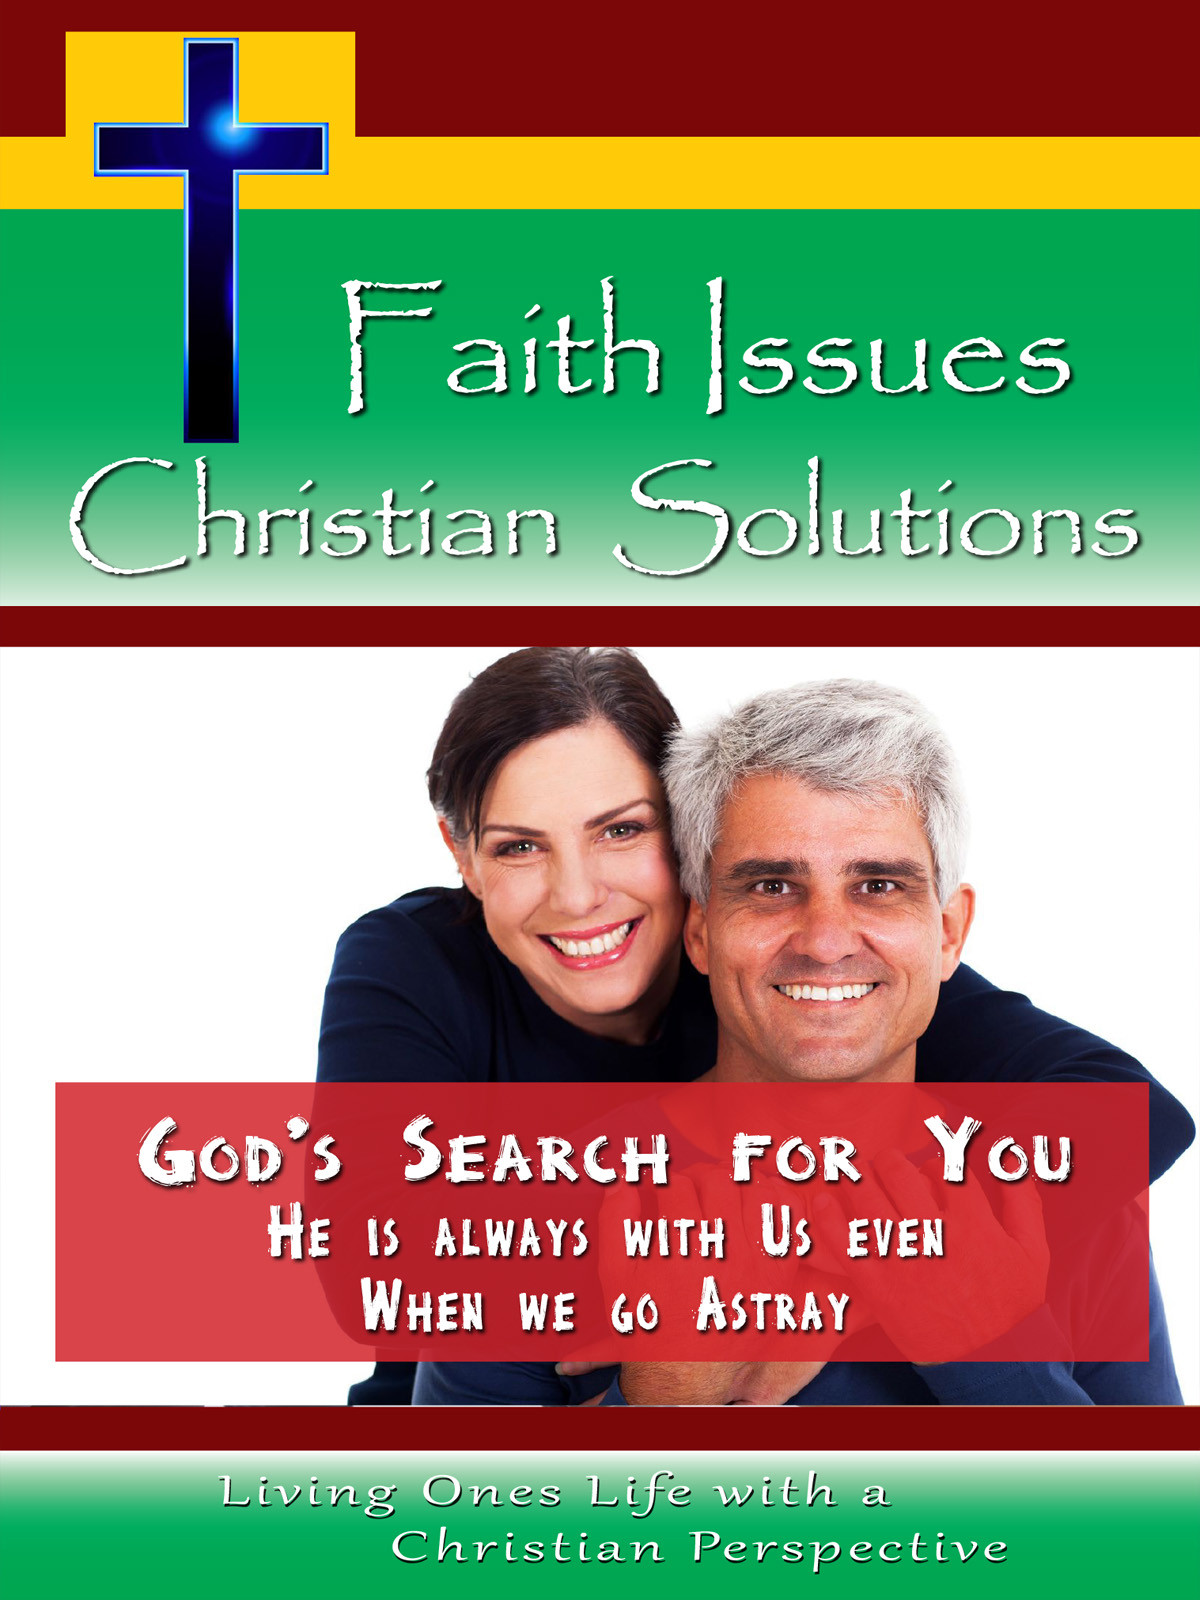 CH10039 - God's Search for You He is always with Us even When we go Astray